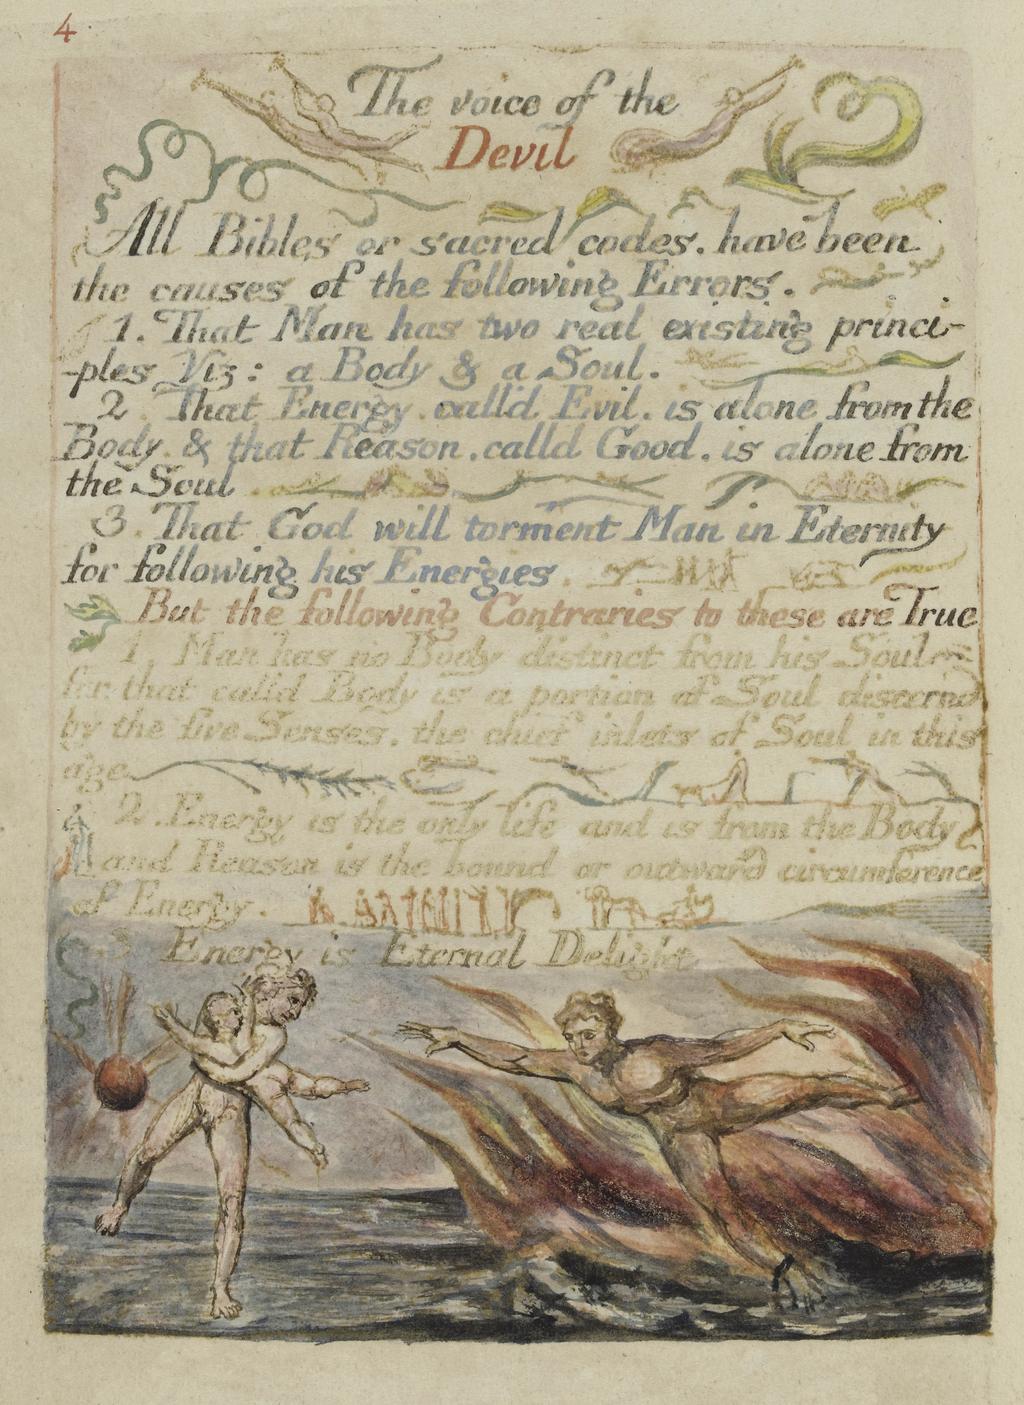 An image of Book/Print. The Marriage of Heaven and Hell. Page 5. Blake, William (British, 1757-1827). Relief etching, hand colouring and colour printing. Coloured ink and watercolour on paper, vellum binding with gilt decoration, height 202 mm, width 132 mm, circa 1808.